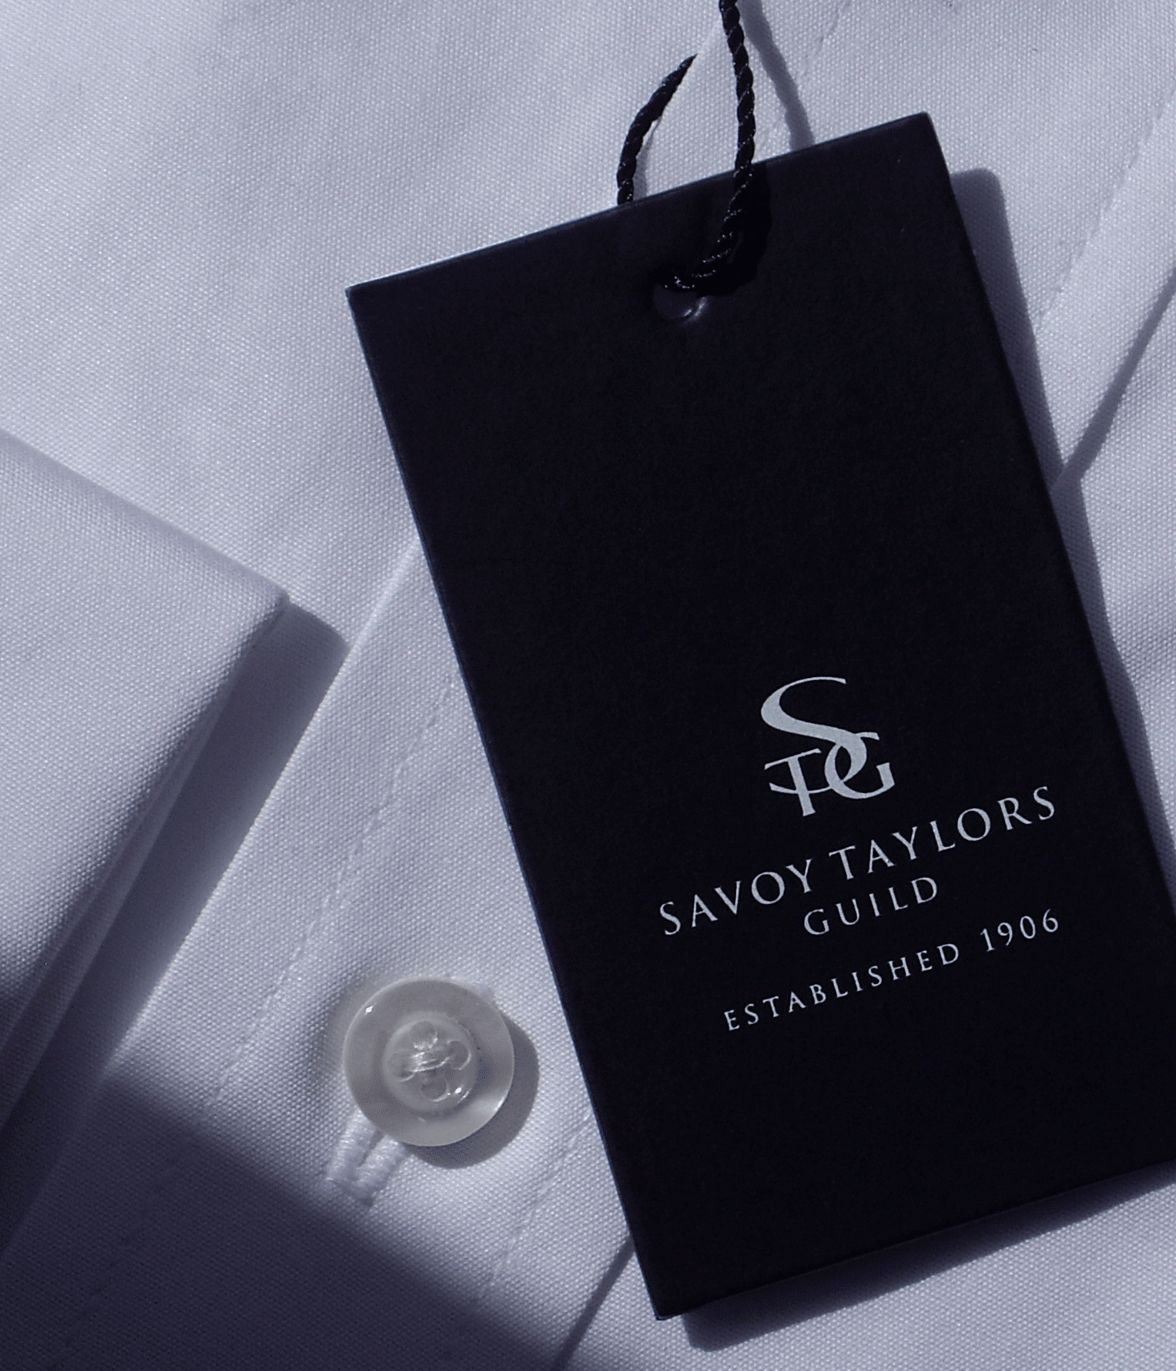 On garment labelling for Savoy Taylors Guild